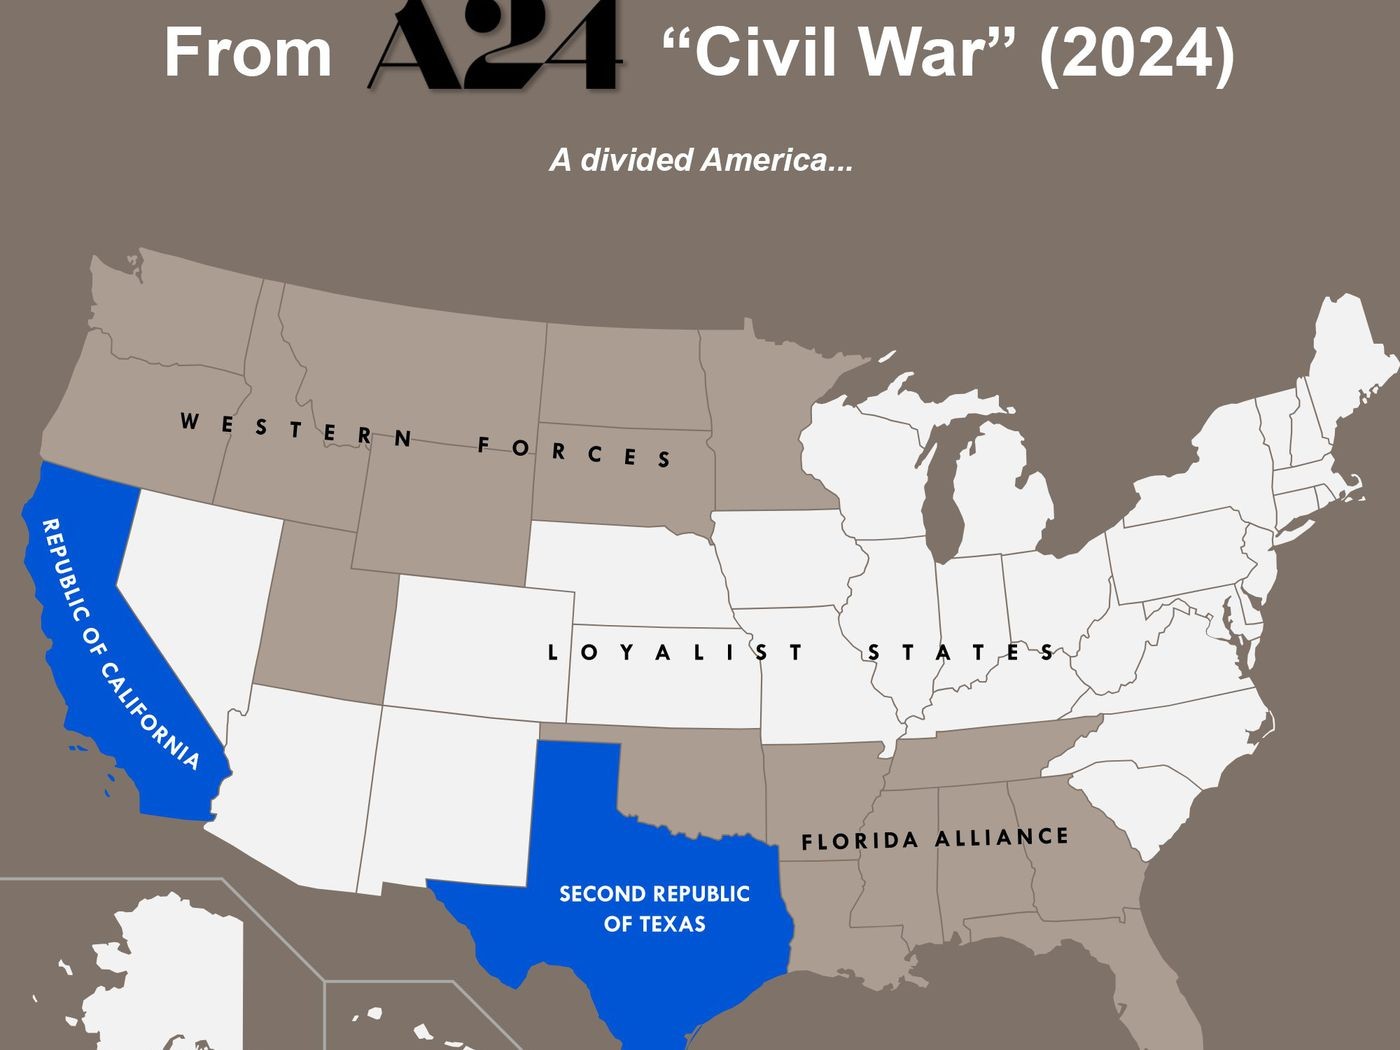 The map from Civil War